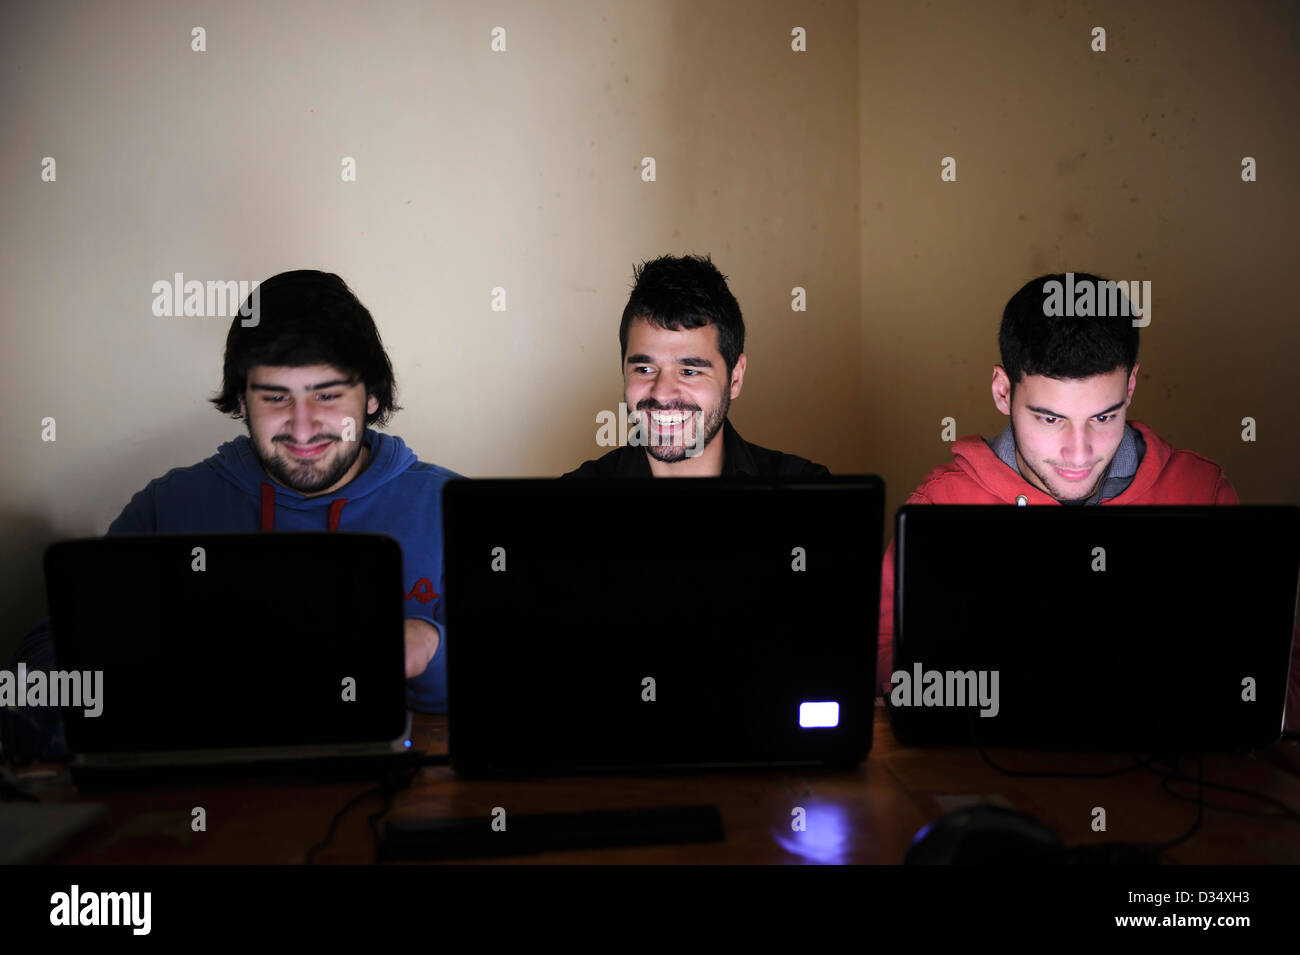 Three young men using laptop computers Stock Photo